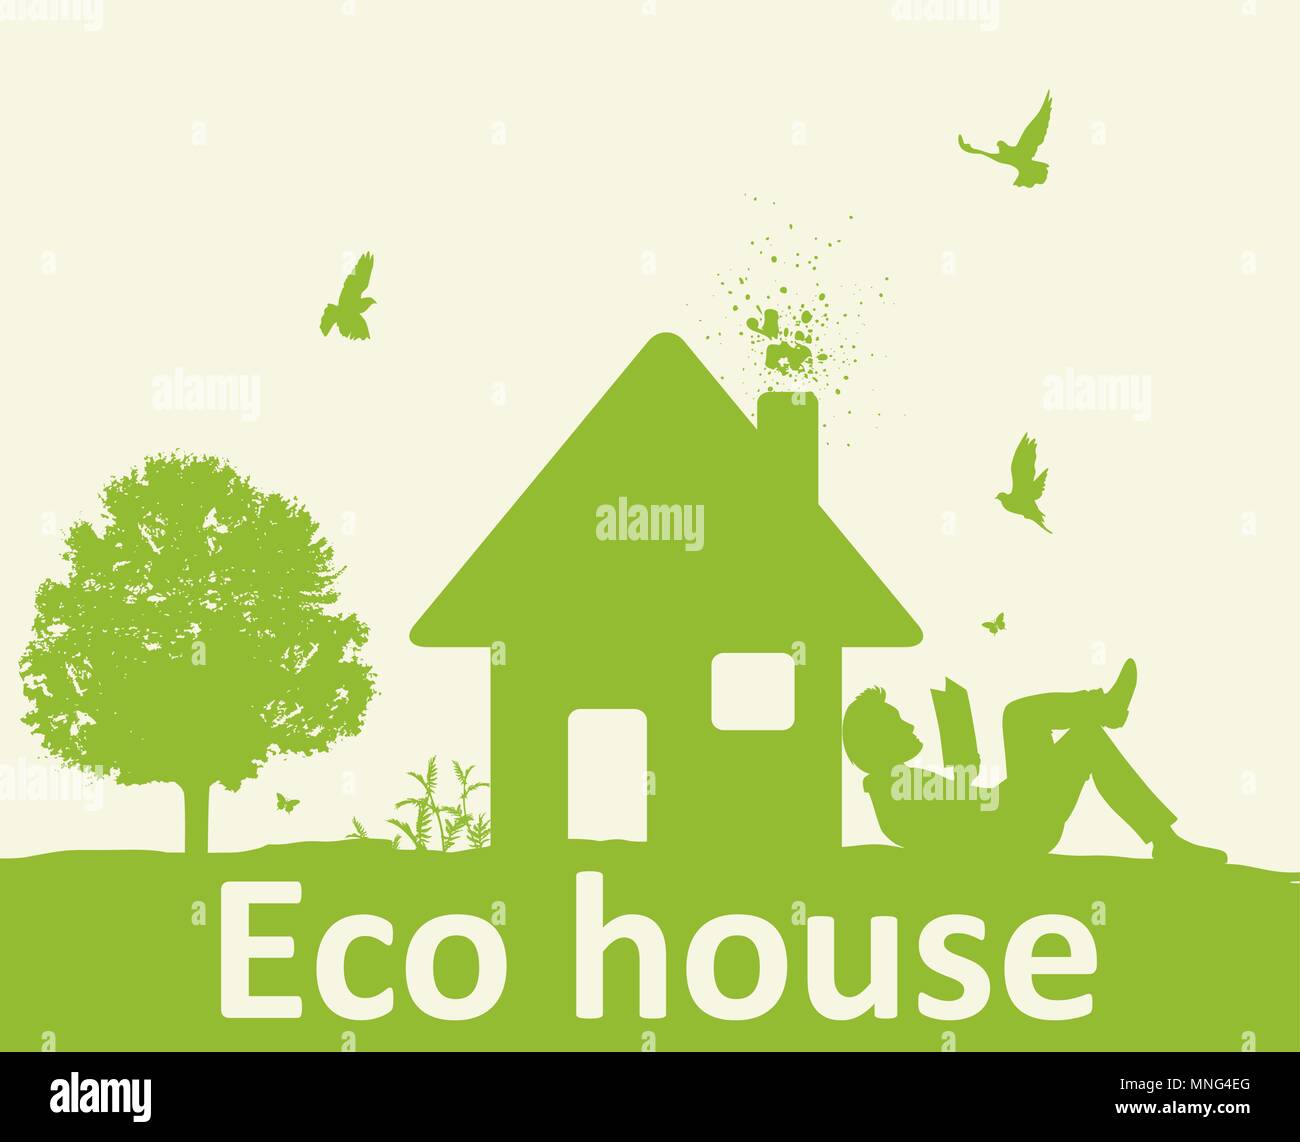 Landscape with green tree, house and man reading a book. Eco-friendly house concept. Stock Vector